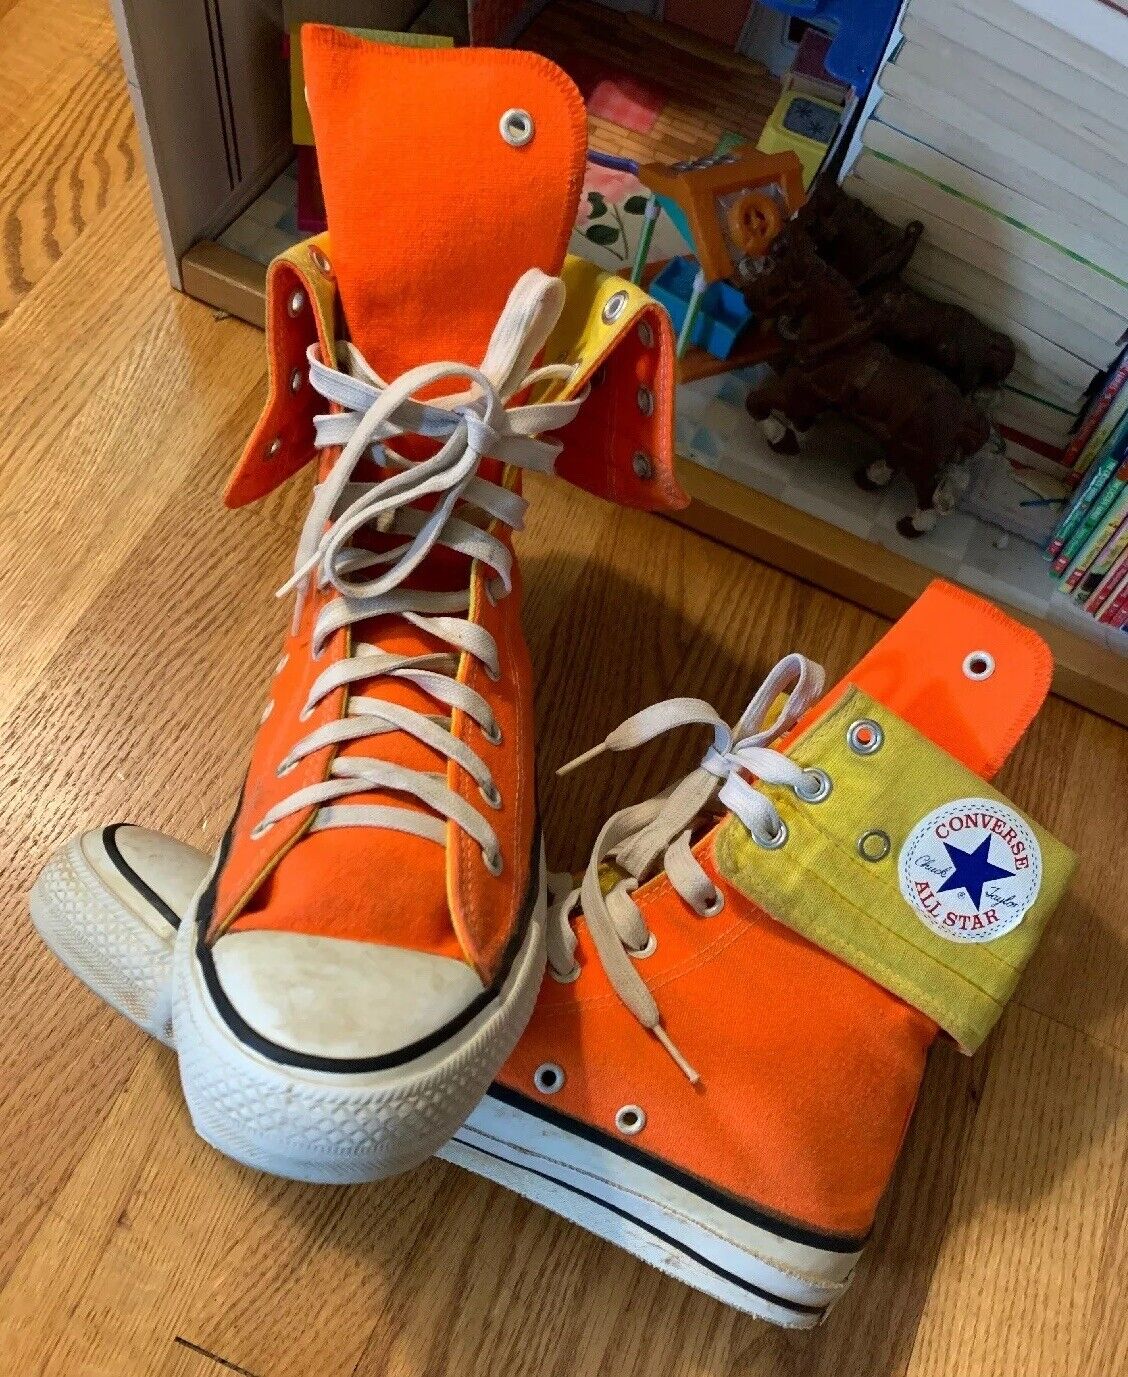 Vintage 70s 80s CONVERSE ALL STAR X - High Top Sneaker Shoes. Size Men US 8  USA.